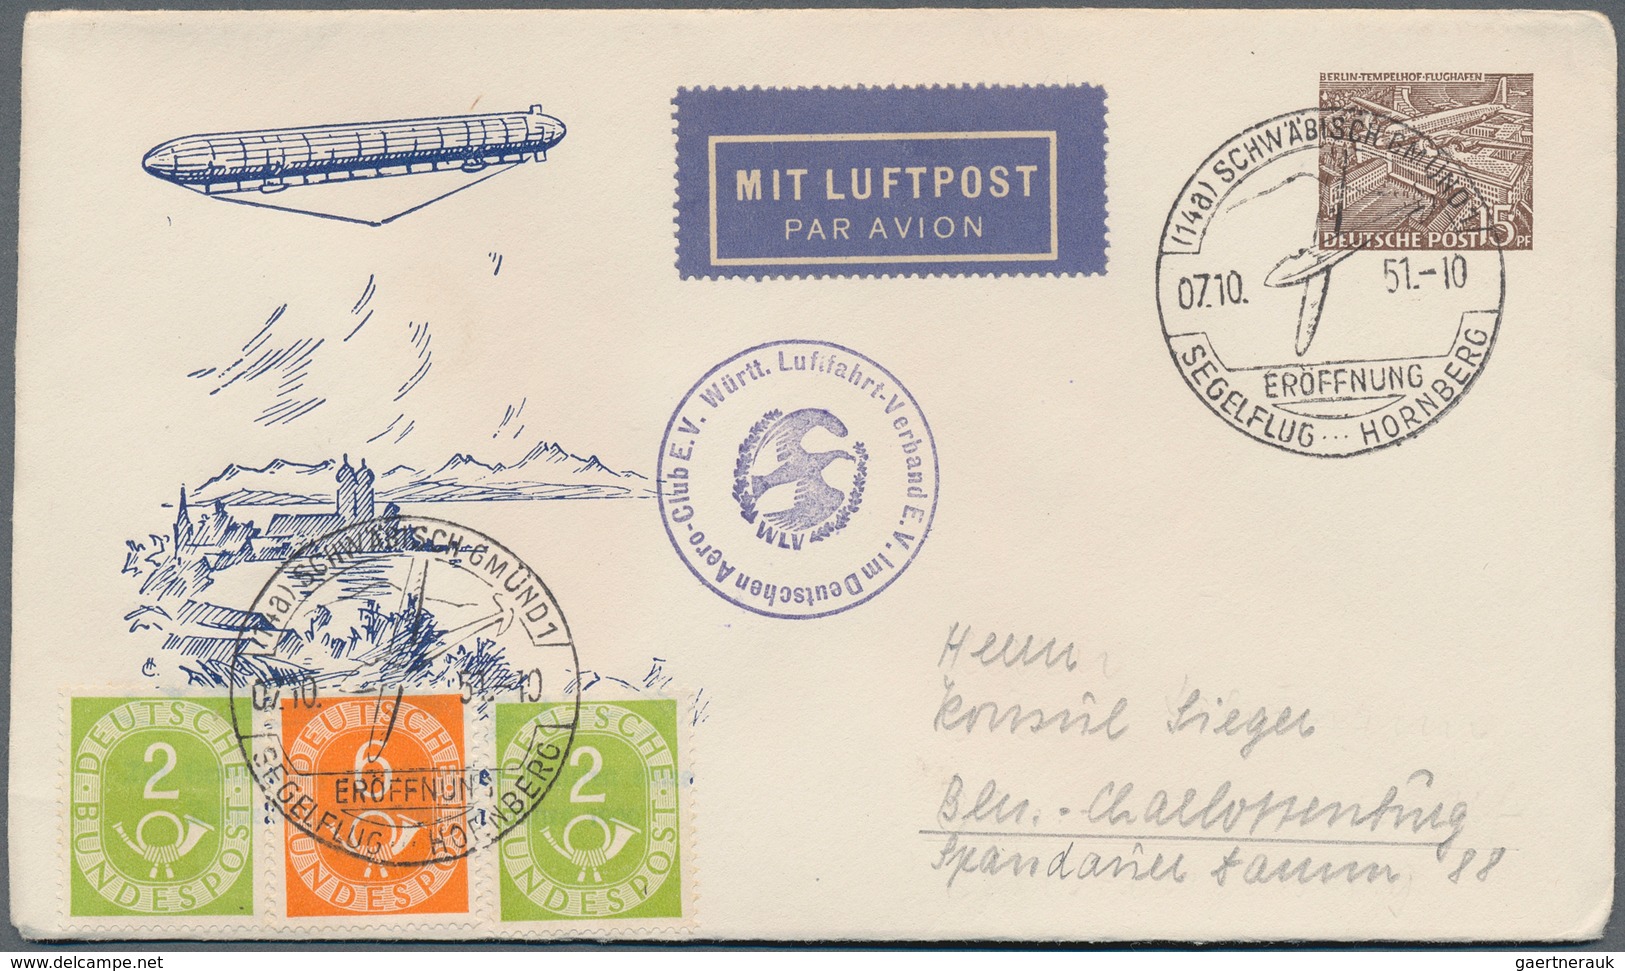 24835 Flugpost Alle Welt: 1930/2003 (ca.), AIRMAIL/SPACE, comprehensive accumulation of apprx. 12.000/15.0